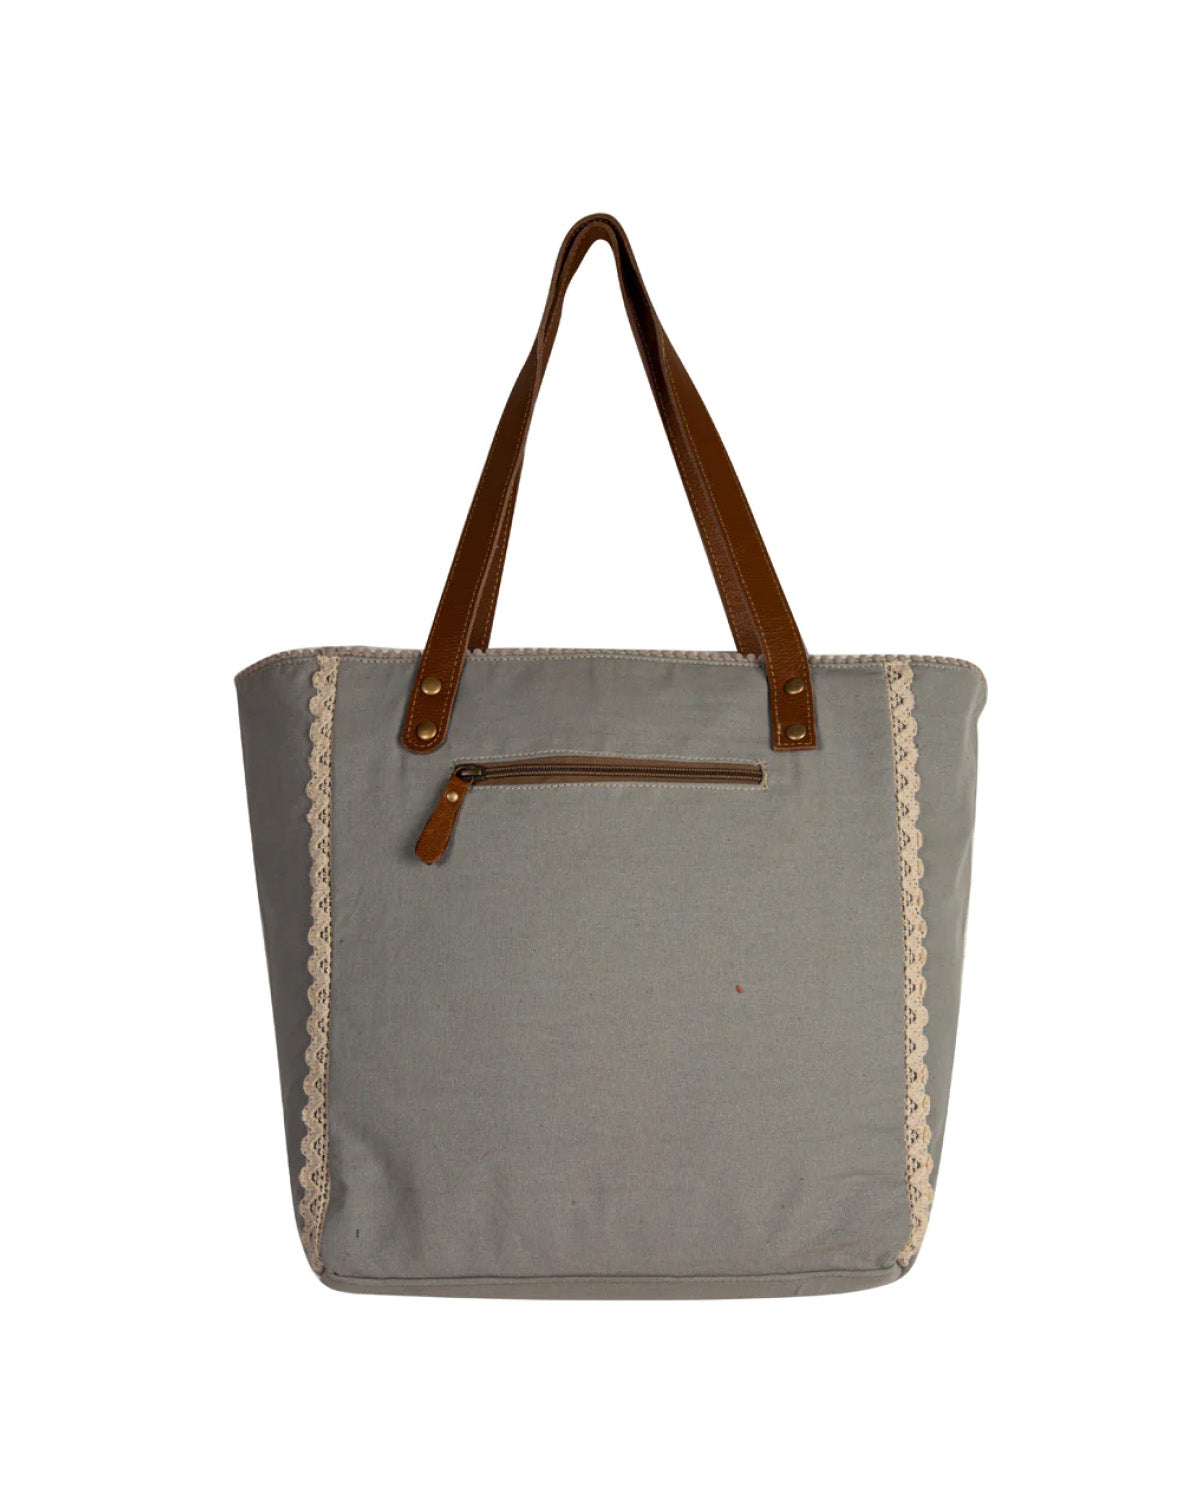 Willow Stream Embroidered Tote Bag